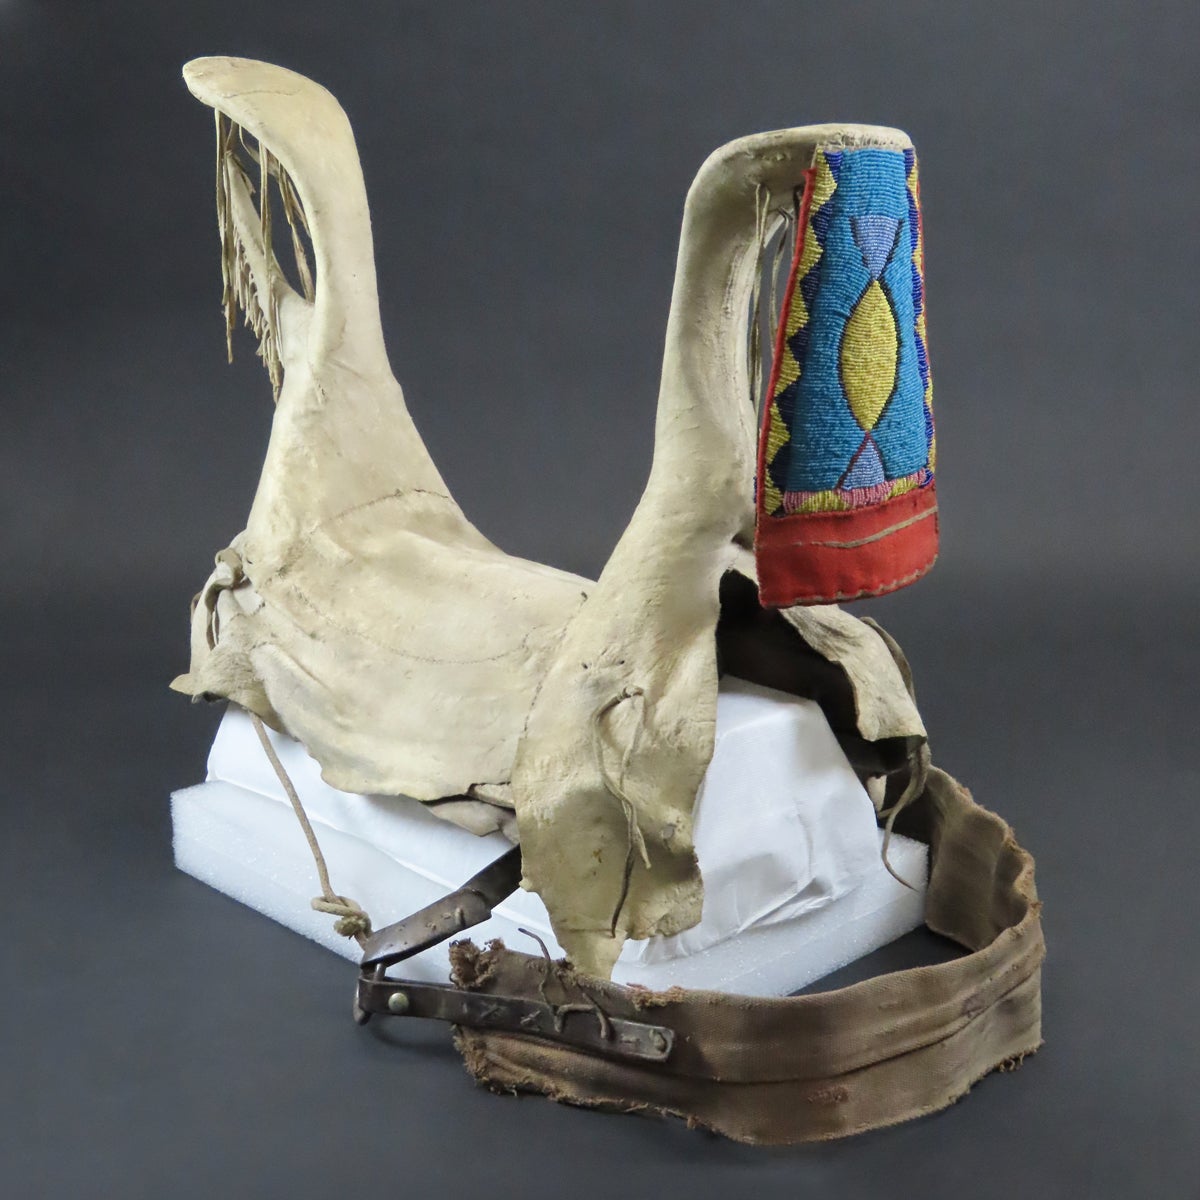 Beaded saddle made from elk antler and hide